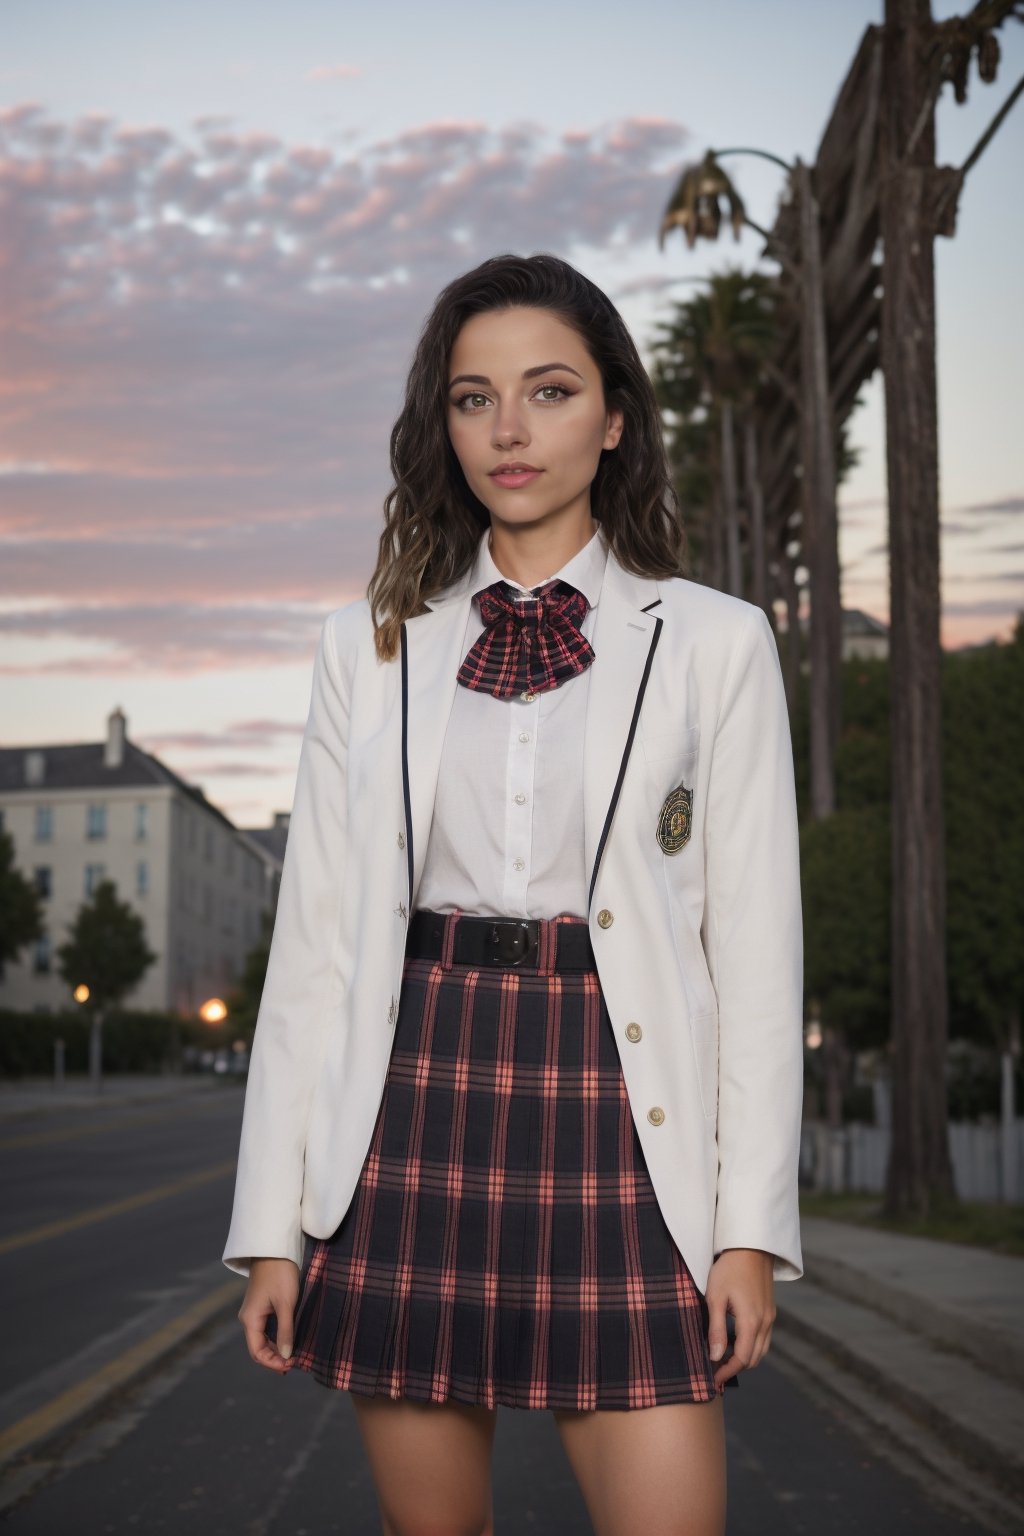 A Woman,  portrait full body_detailed,  very beautiful,  detailed,  intricate details,  Color Booster, SkpFace, 

badge, blazer, buttons, jacket, necktie, plaid, plaid_pants, plaid_skirt, school_uniform, shirt, skirt, long_sleeves, pleated_skirt, checkered_skirt, bow, white_shirt, plaid_bow, plaid_dress, plaid_jacket, plaid_necktie, plaid_neckwear, shuujin_academy_uniform

((sunset, street, melissa stemmer's photography style))

Film Grain, FilmGrainAF,ProduceSei,photorealistic